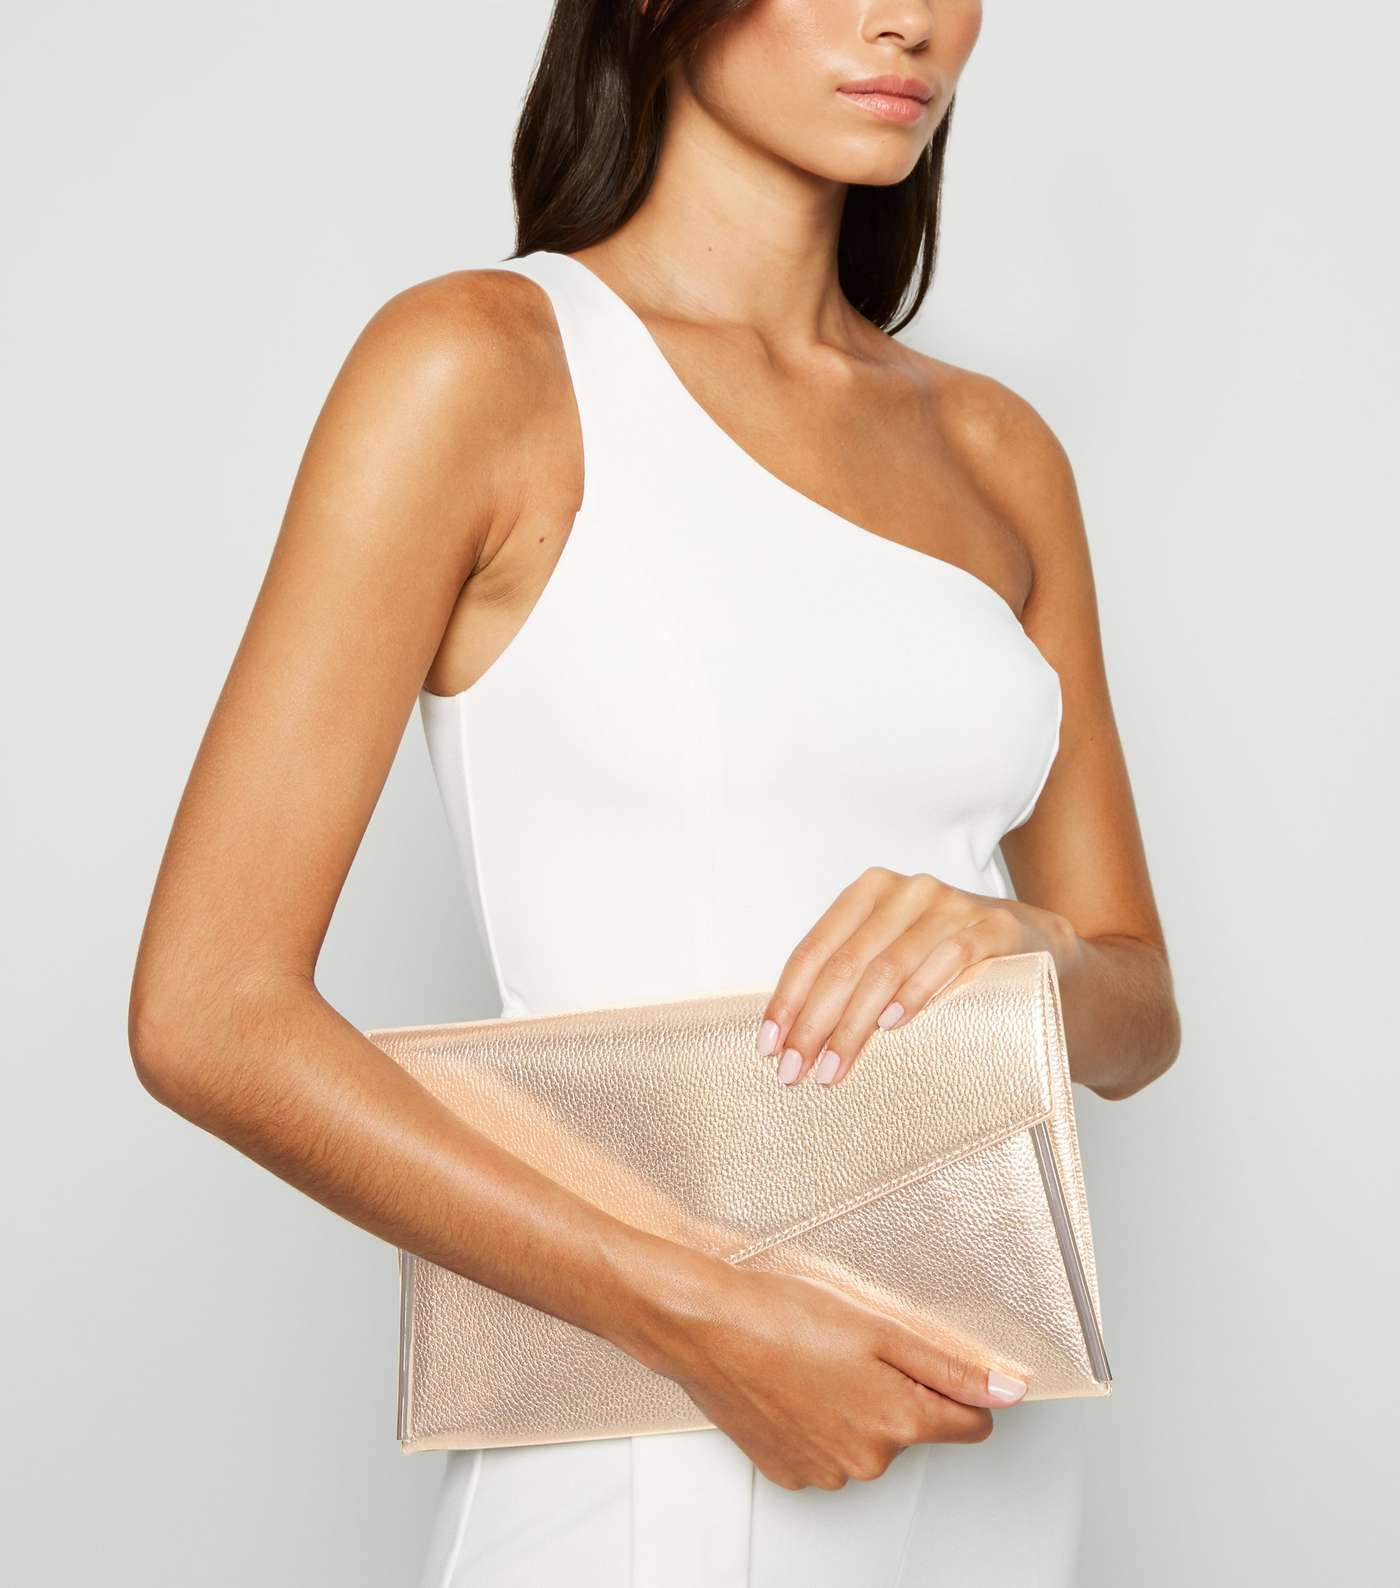 Rose Gold Leather-Look Asymmetric Clutch Image 5